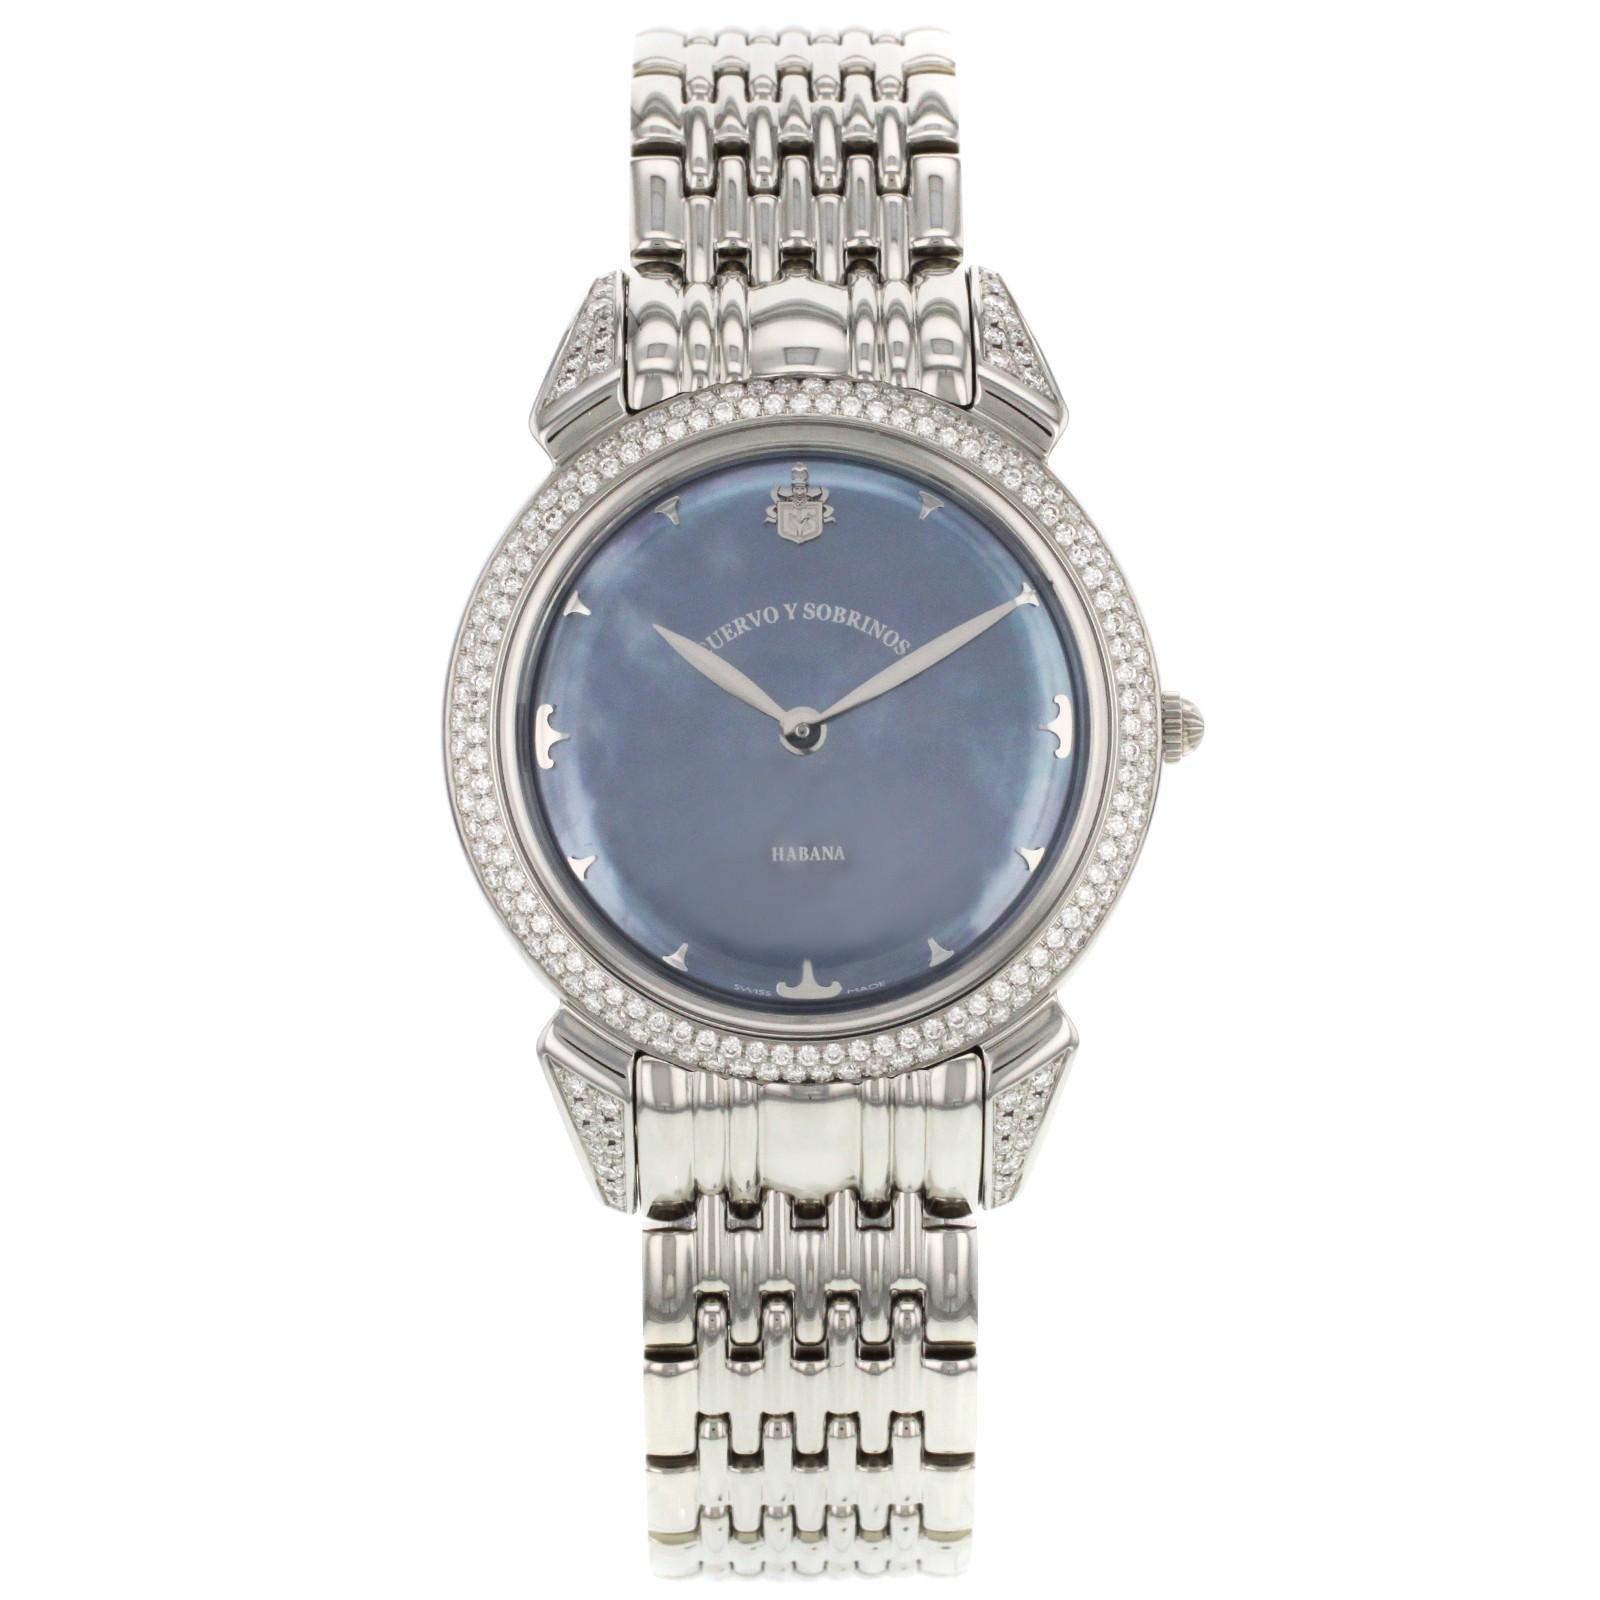 Historiador 34mm in Stainless Steel with Diamonds on Steel Bracelet with Blue MOP Dial